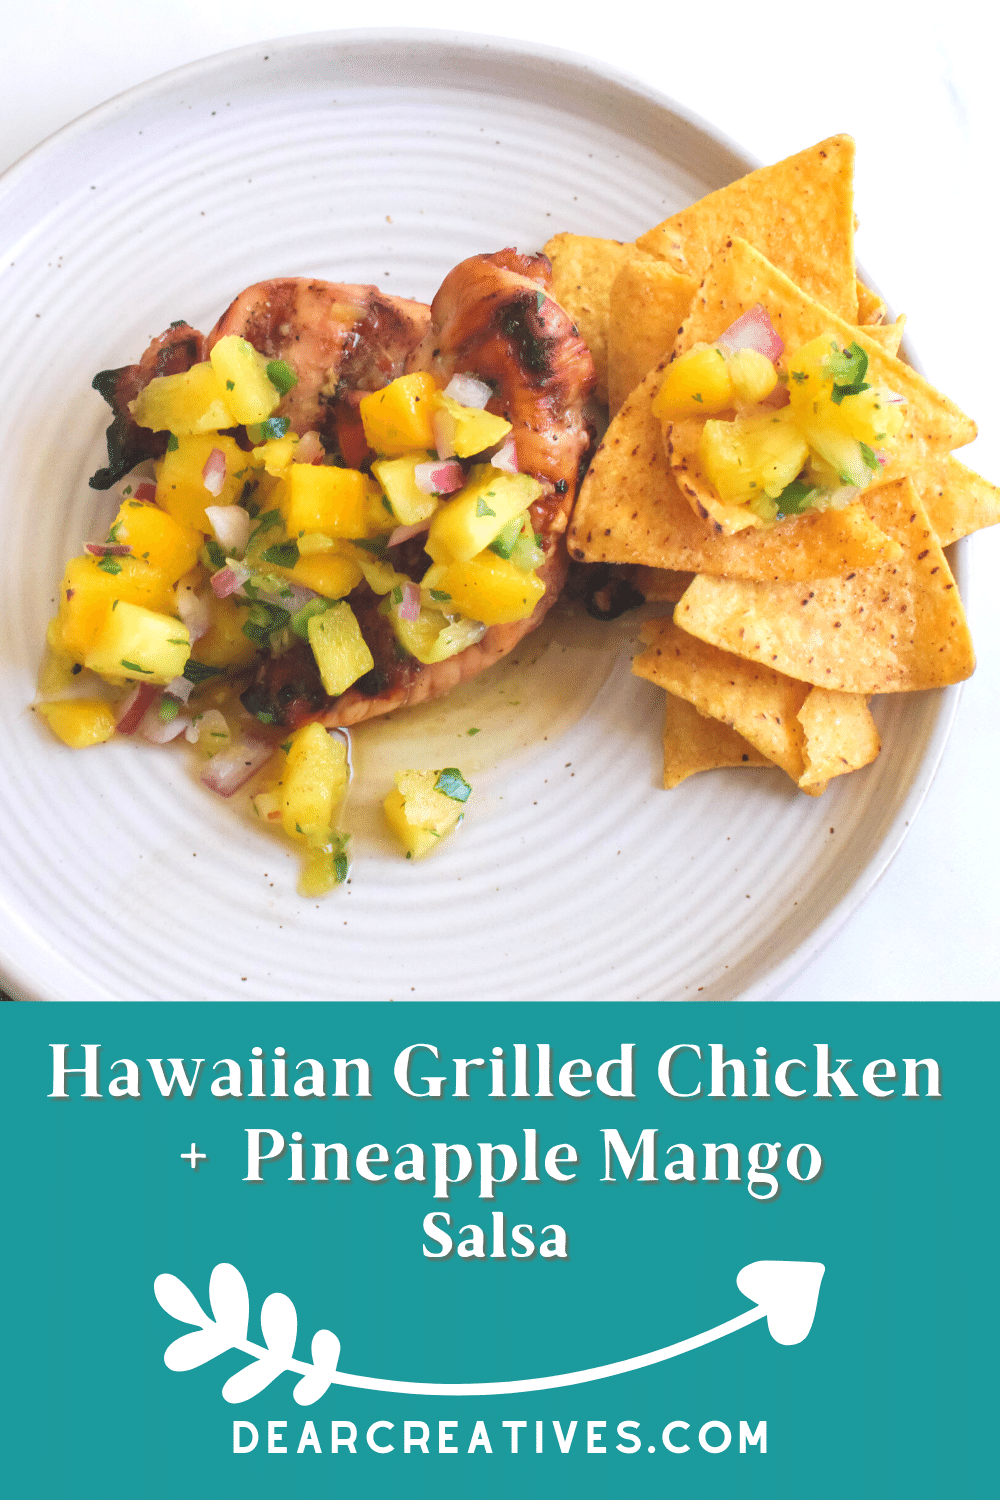 Hawaiian Grilled Chicken - Easy grilled chicken recipe that is so tasty! Recipes for the chicken marinade and pineapple mango salsa. Print the recipes at DearCreatives.com